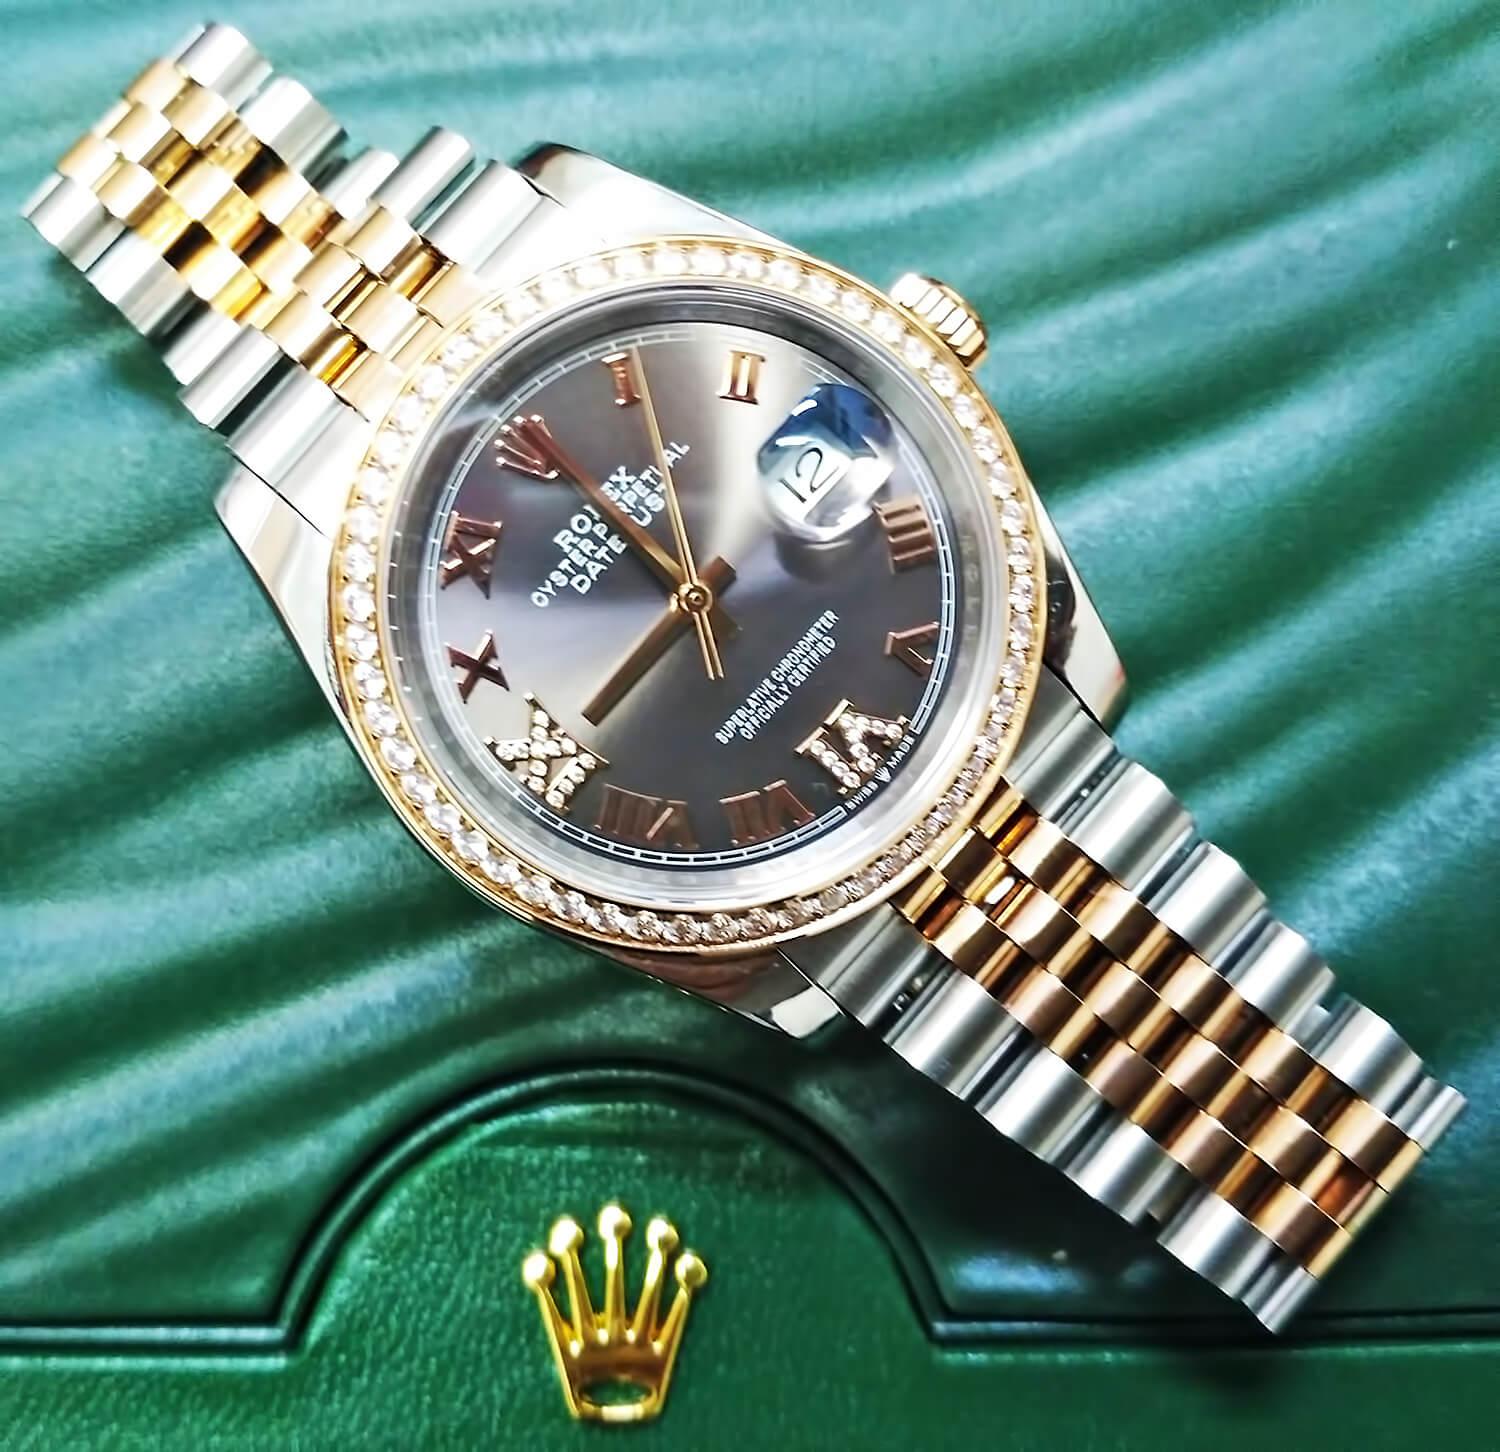 Точная реплика Rolex Oyster Perpetual Datejust 36mm Steel and Everose Gold